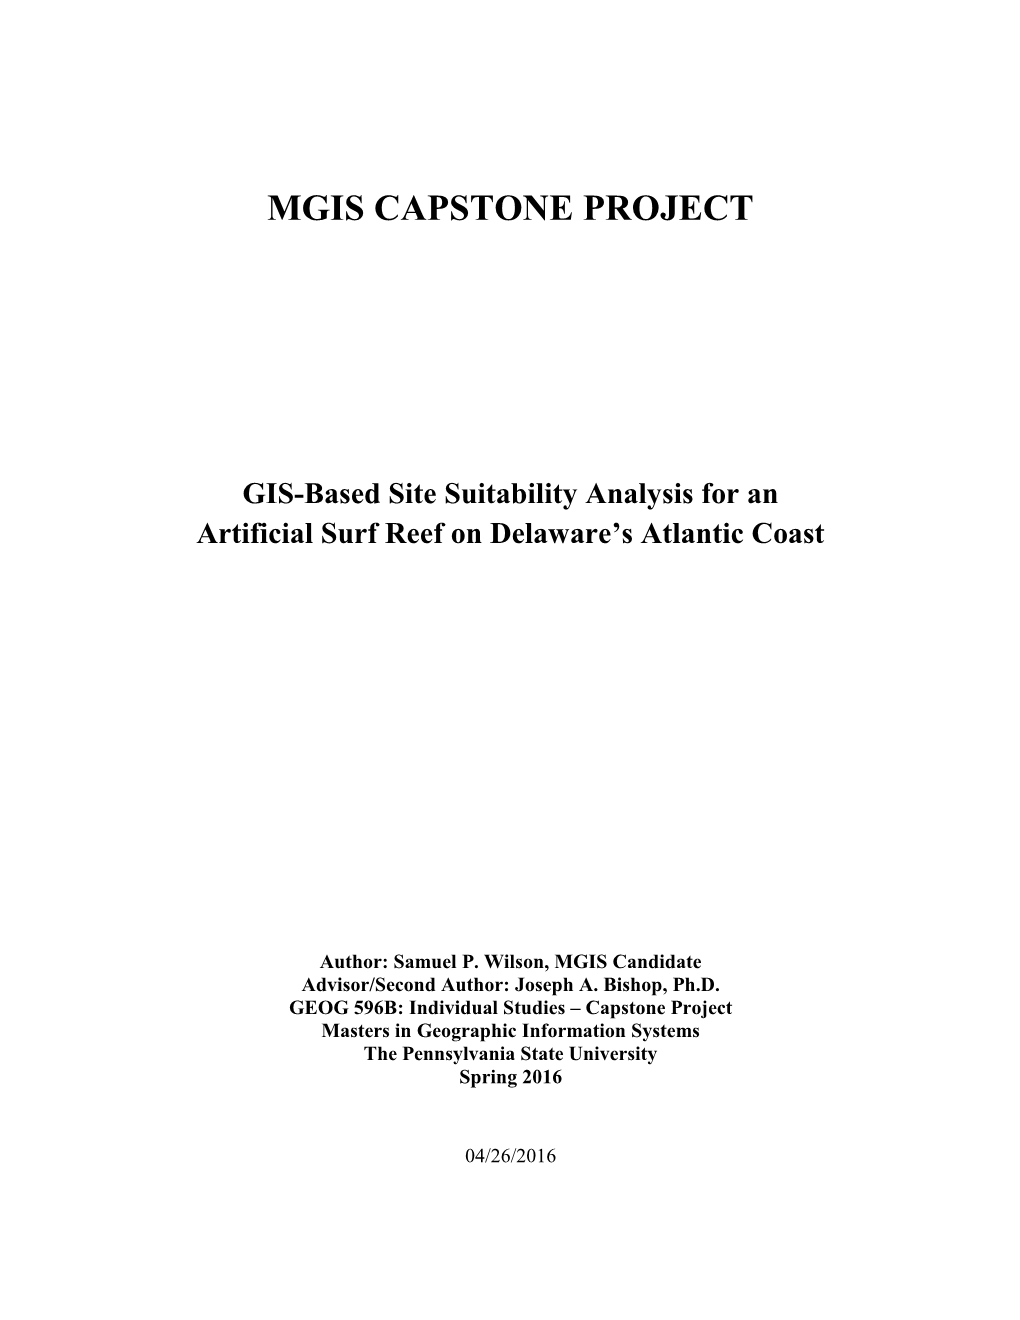 GIS-Based Site Suitability Analysis for an Artificial Surf Reef on Delaware's